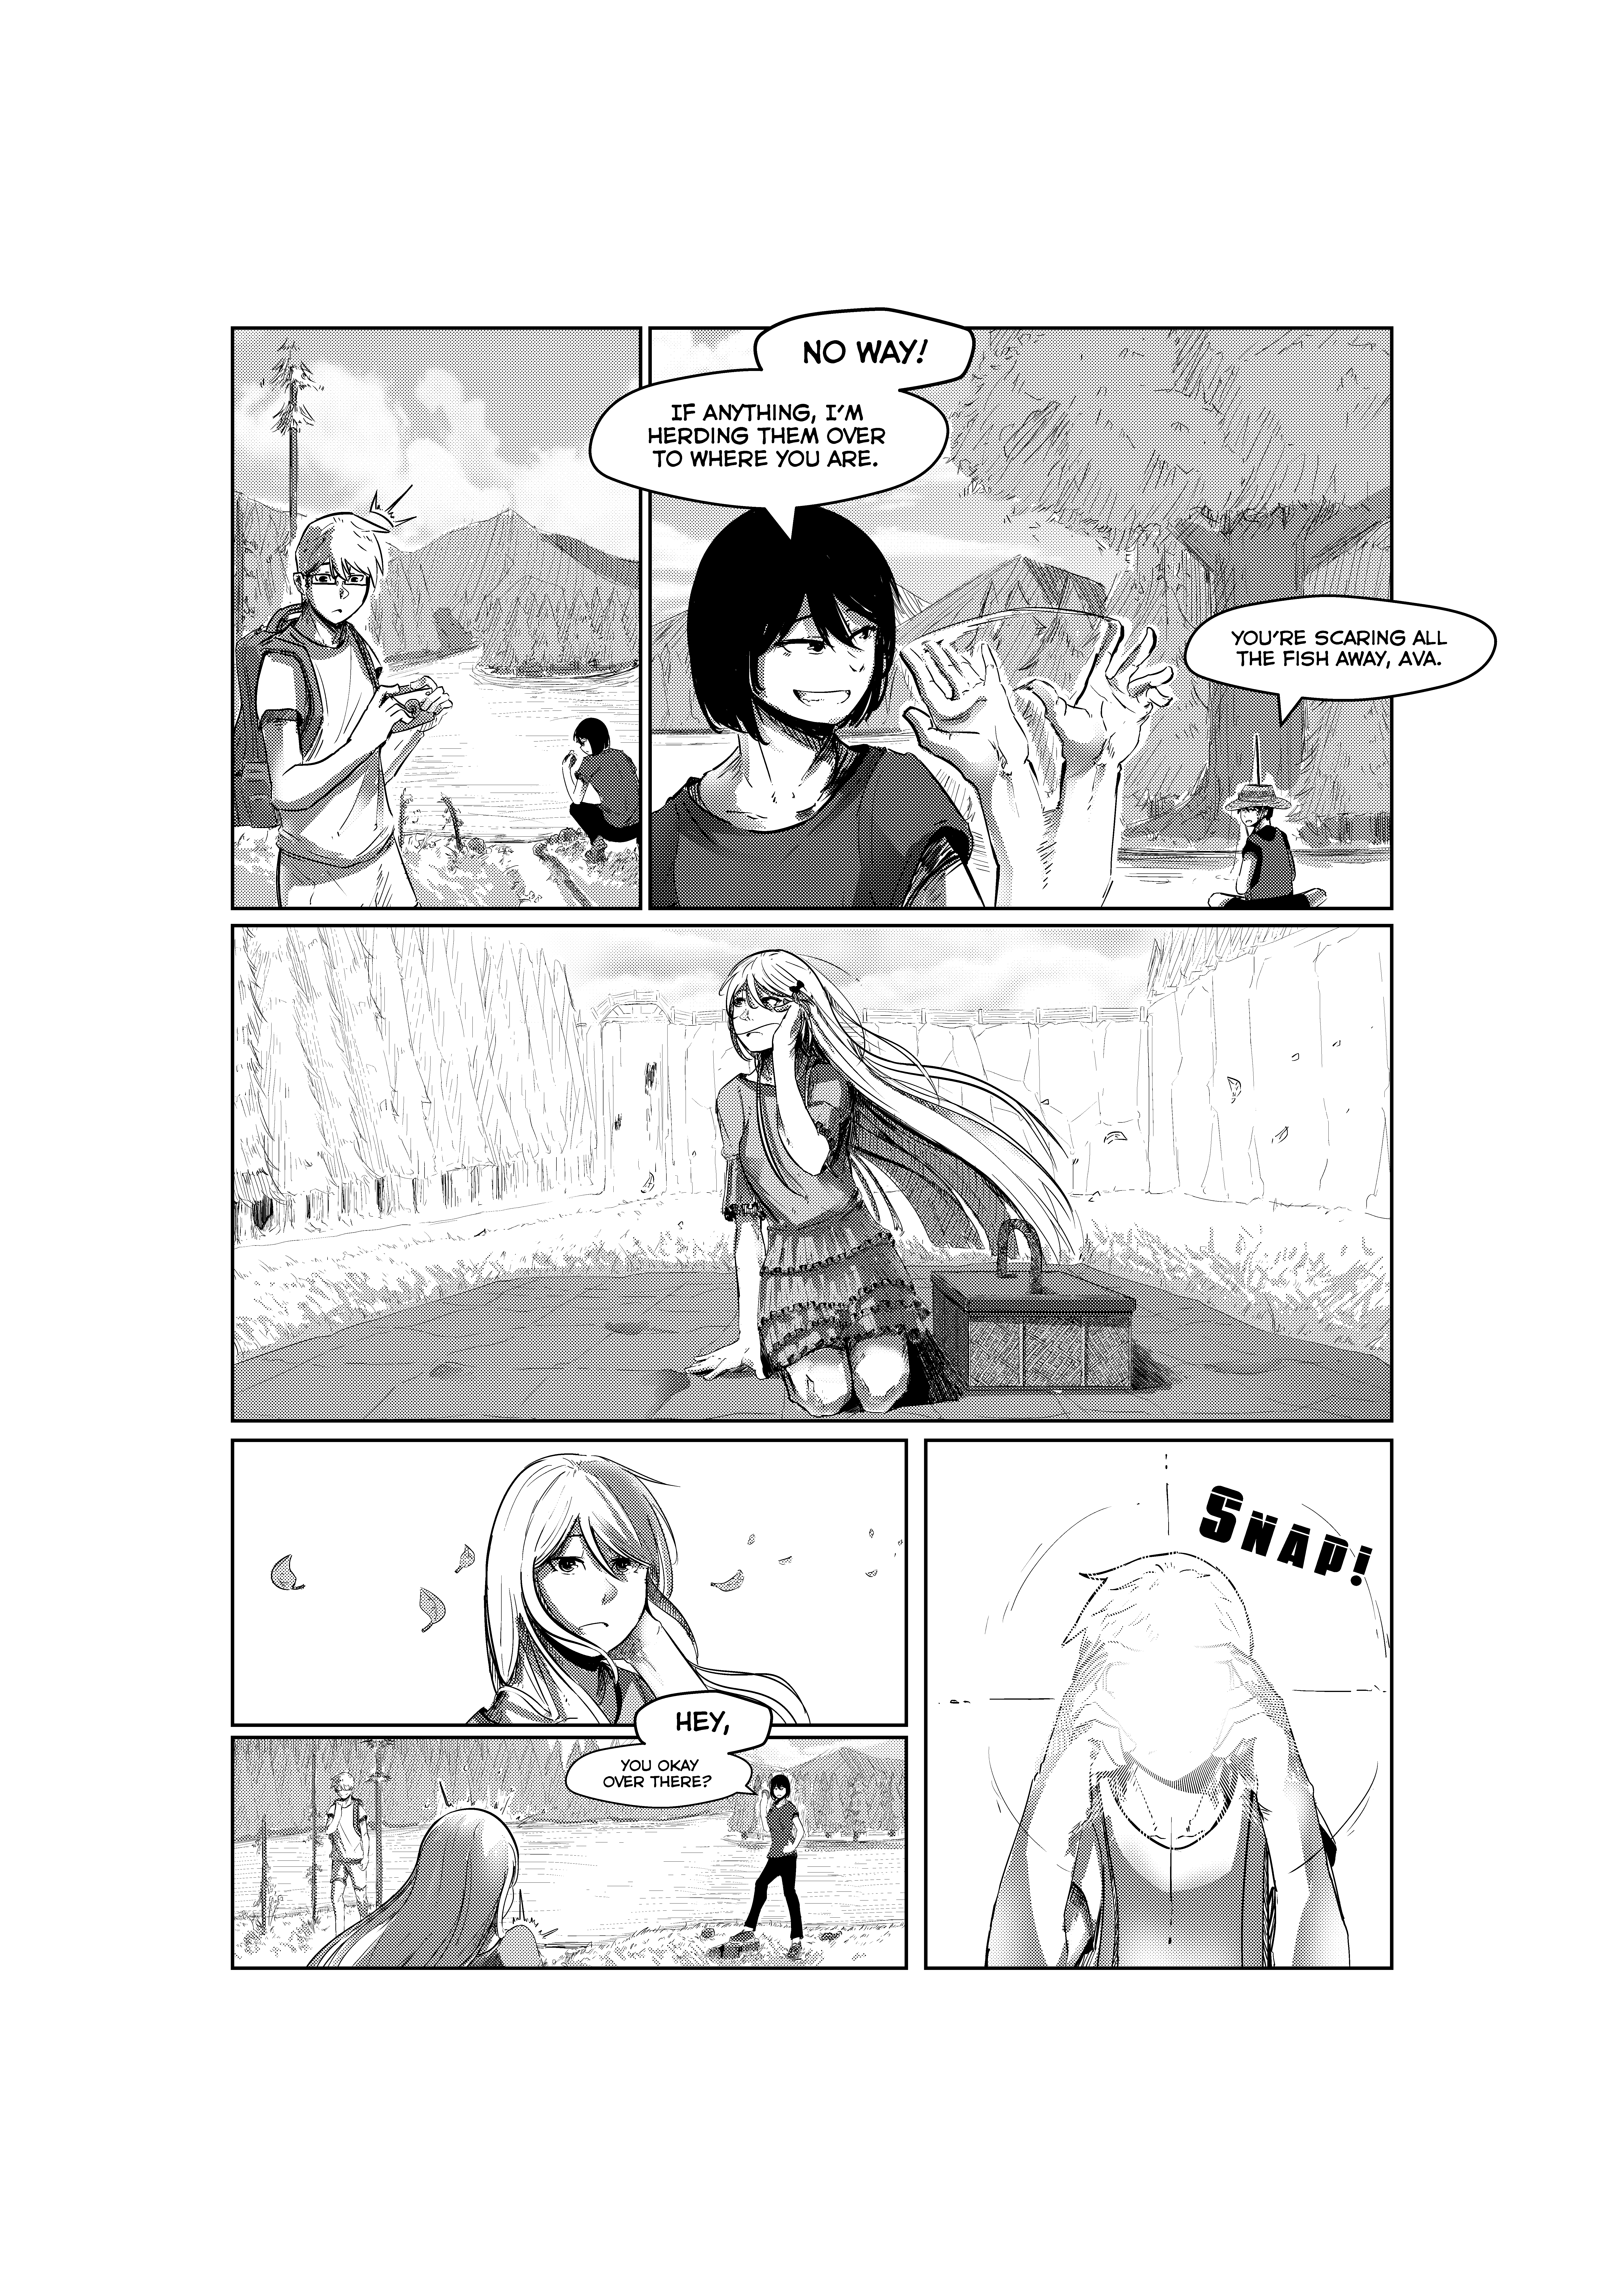 Opposites In Disguise - 10 page 11